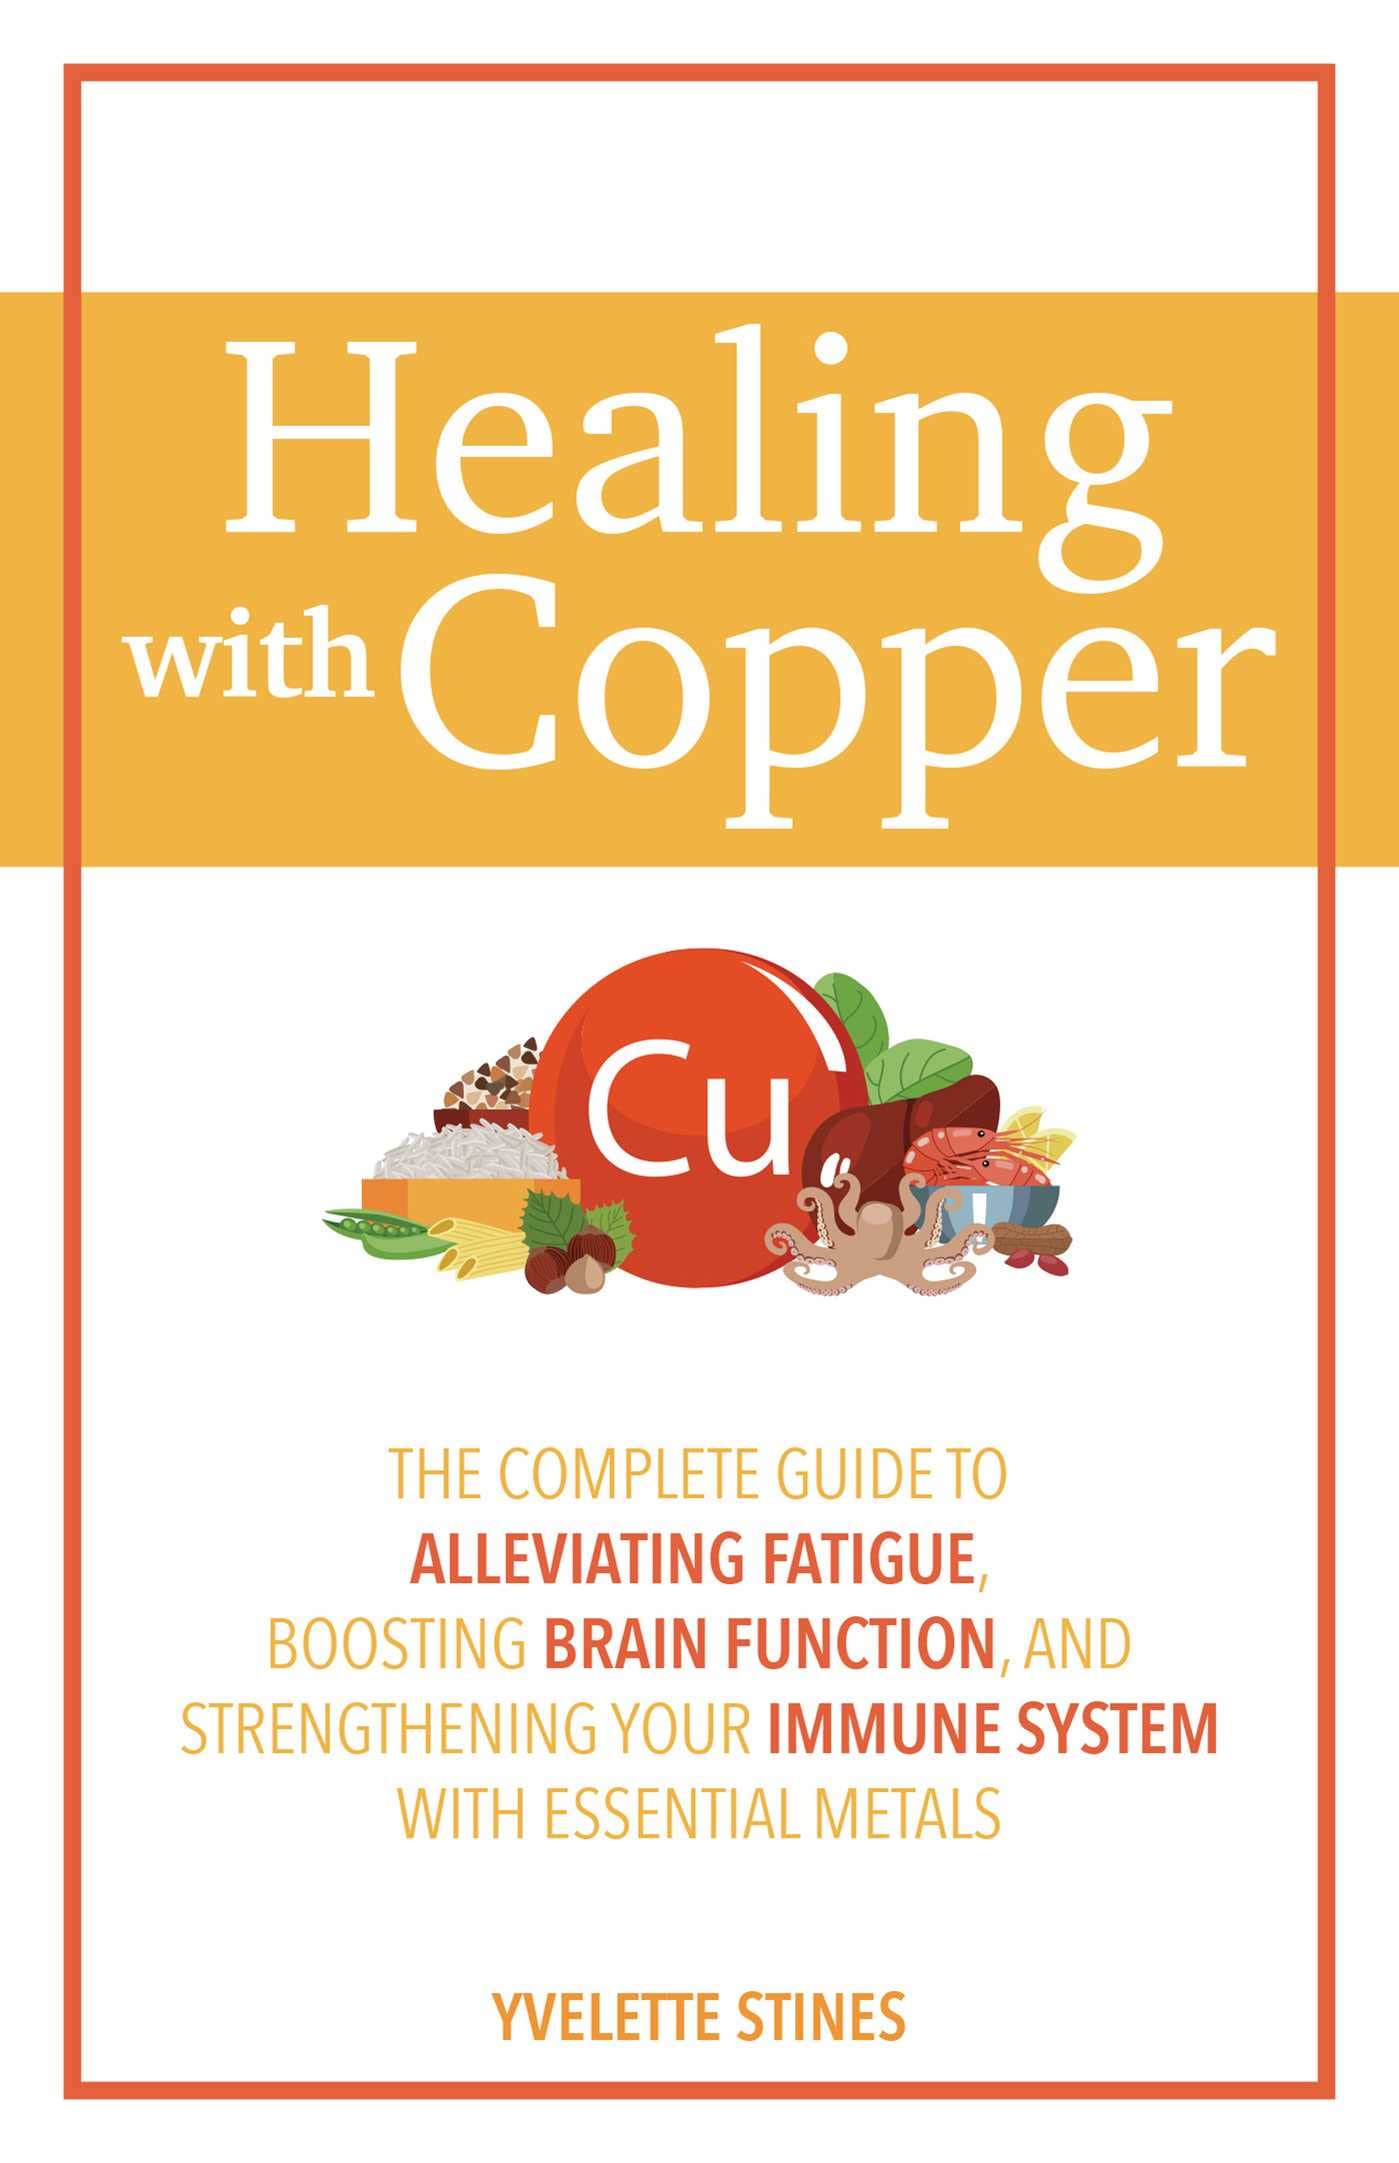 Healing with Copper: The Complete Guide to Alleviating Fatigue, Boosting Brain Function, and Strengthening Your Immune System with Essentia (Paperback)